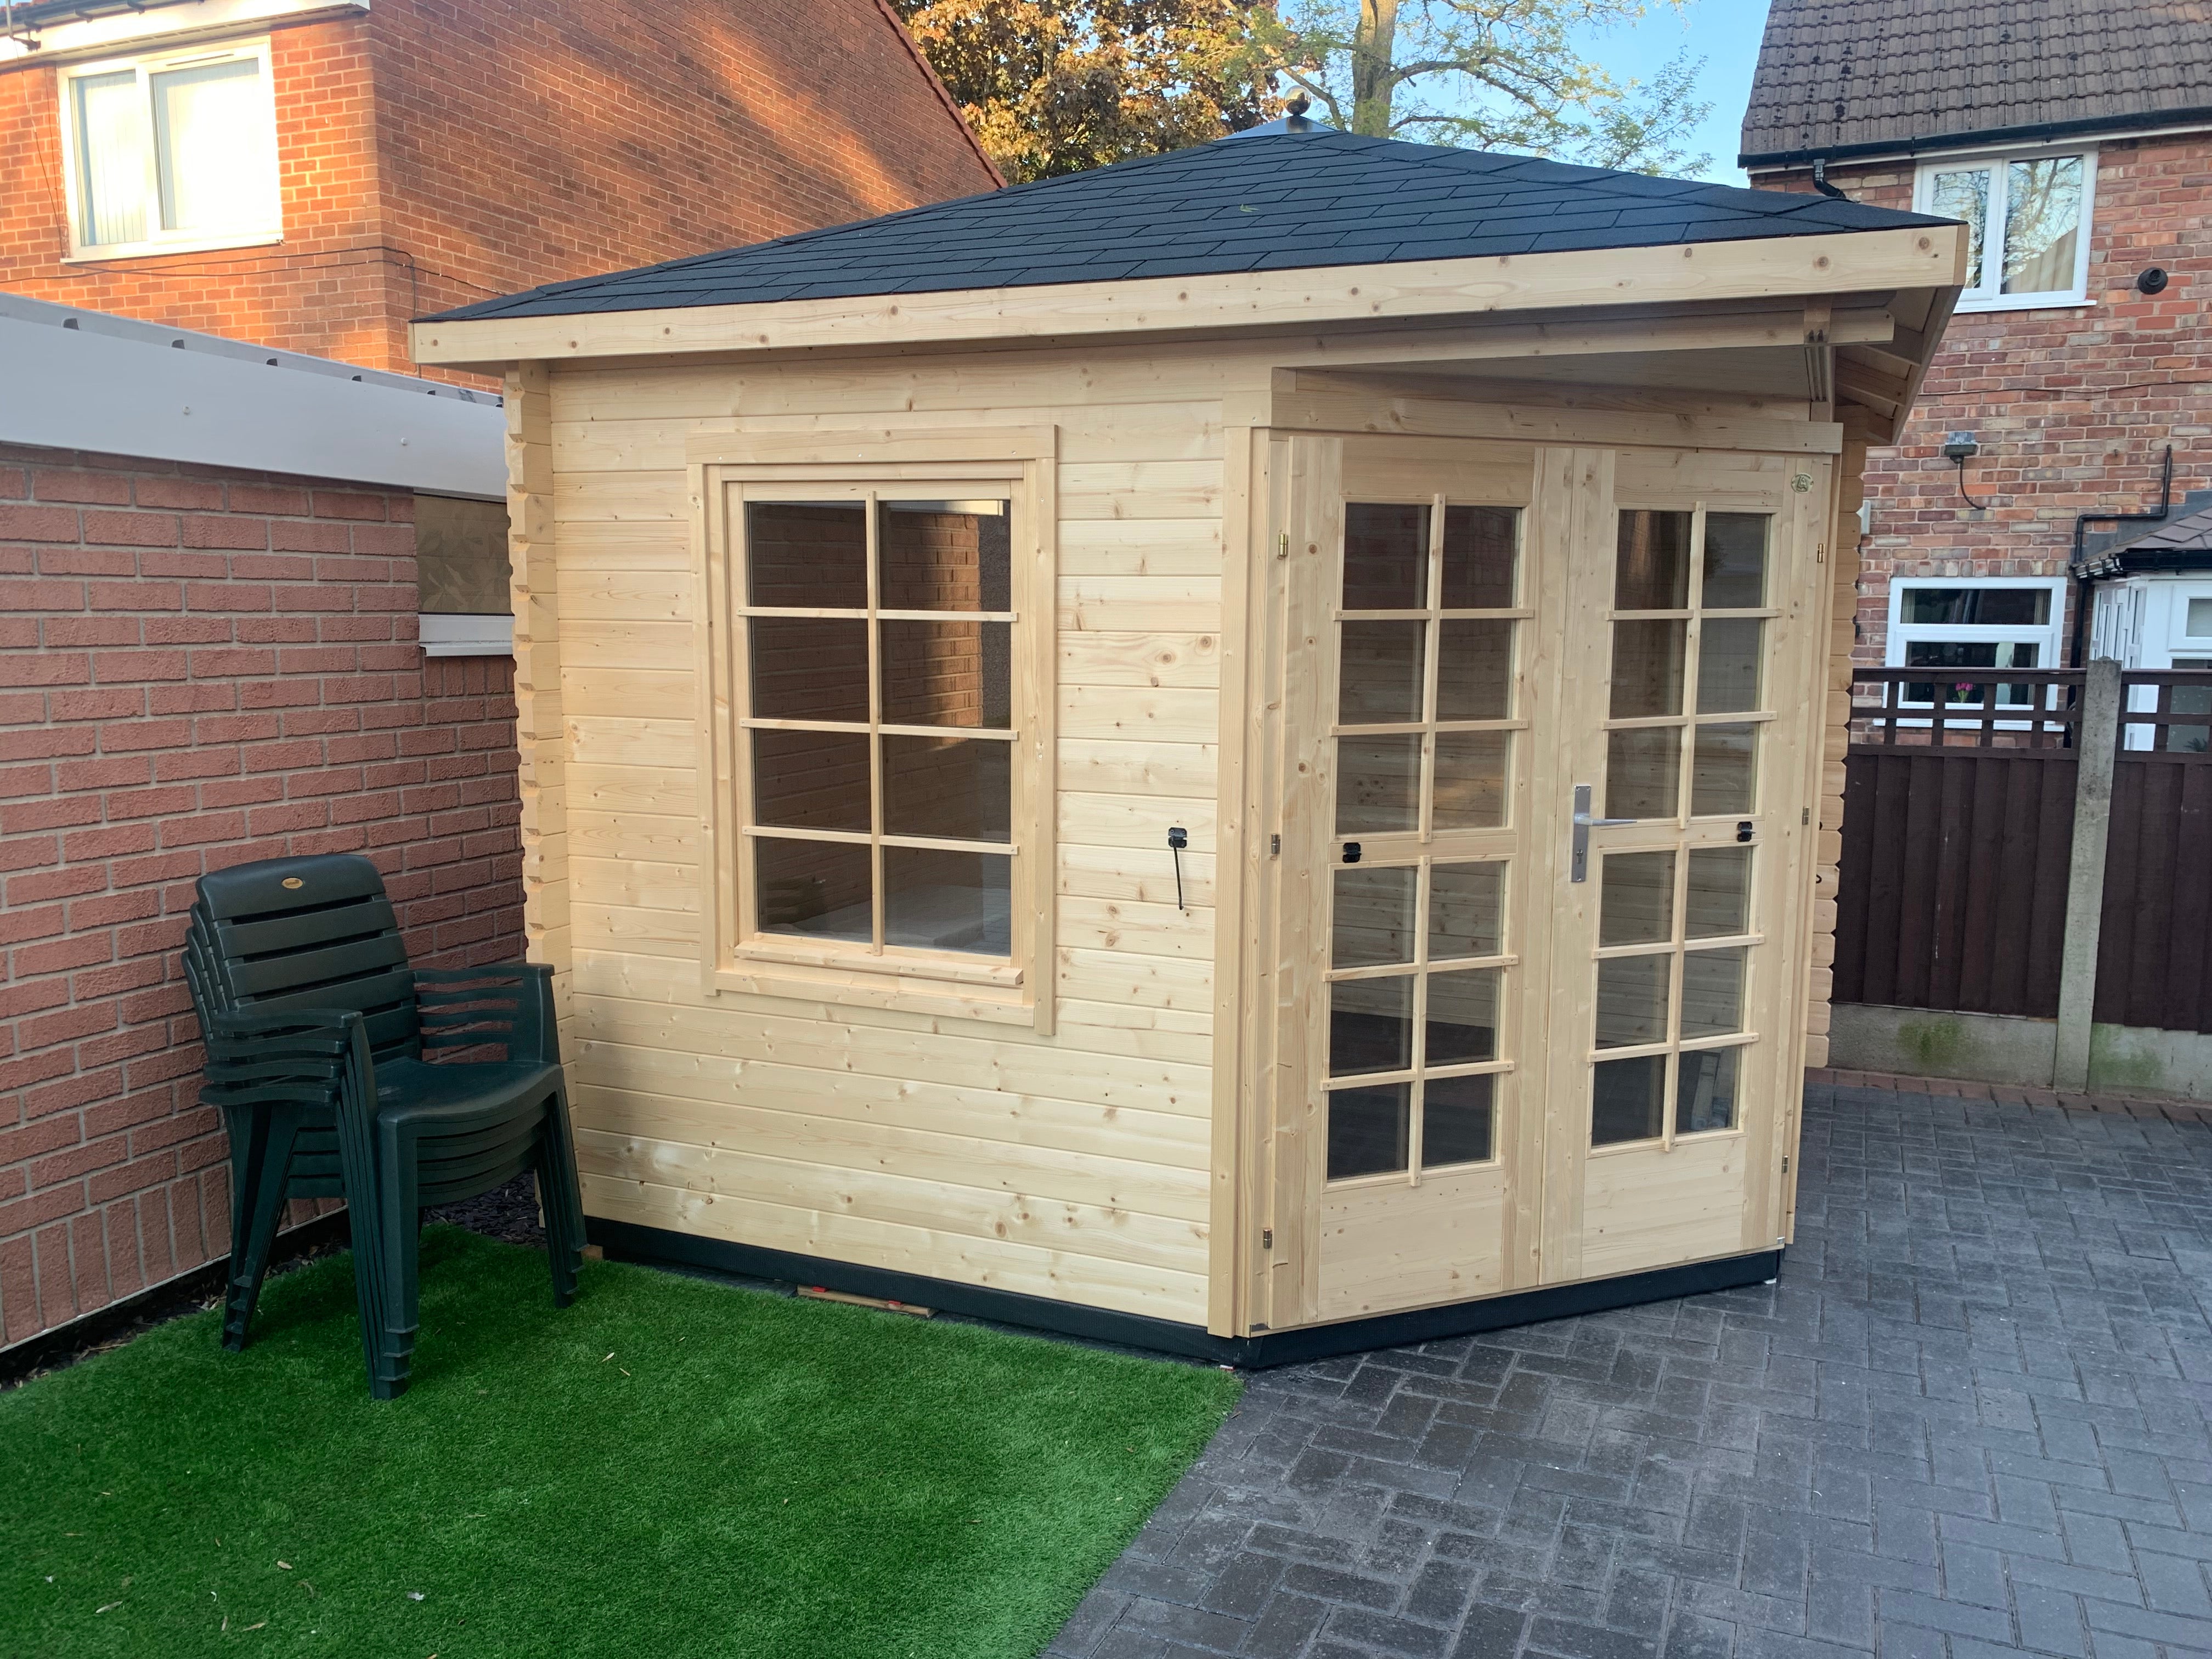 Make the most of your outdoor space with a Corner Garden Room